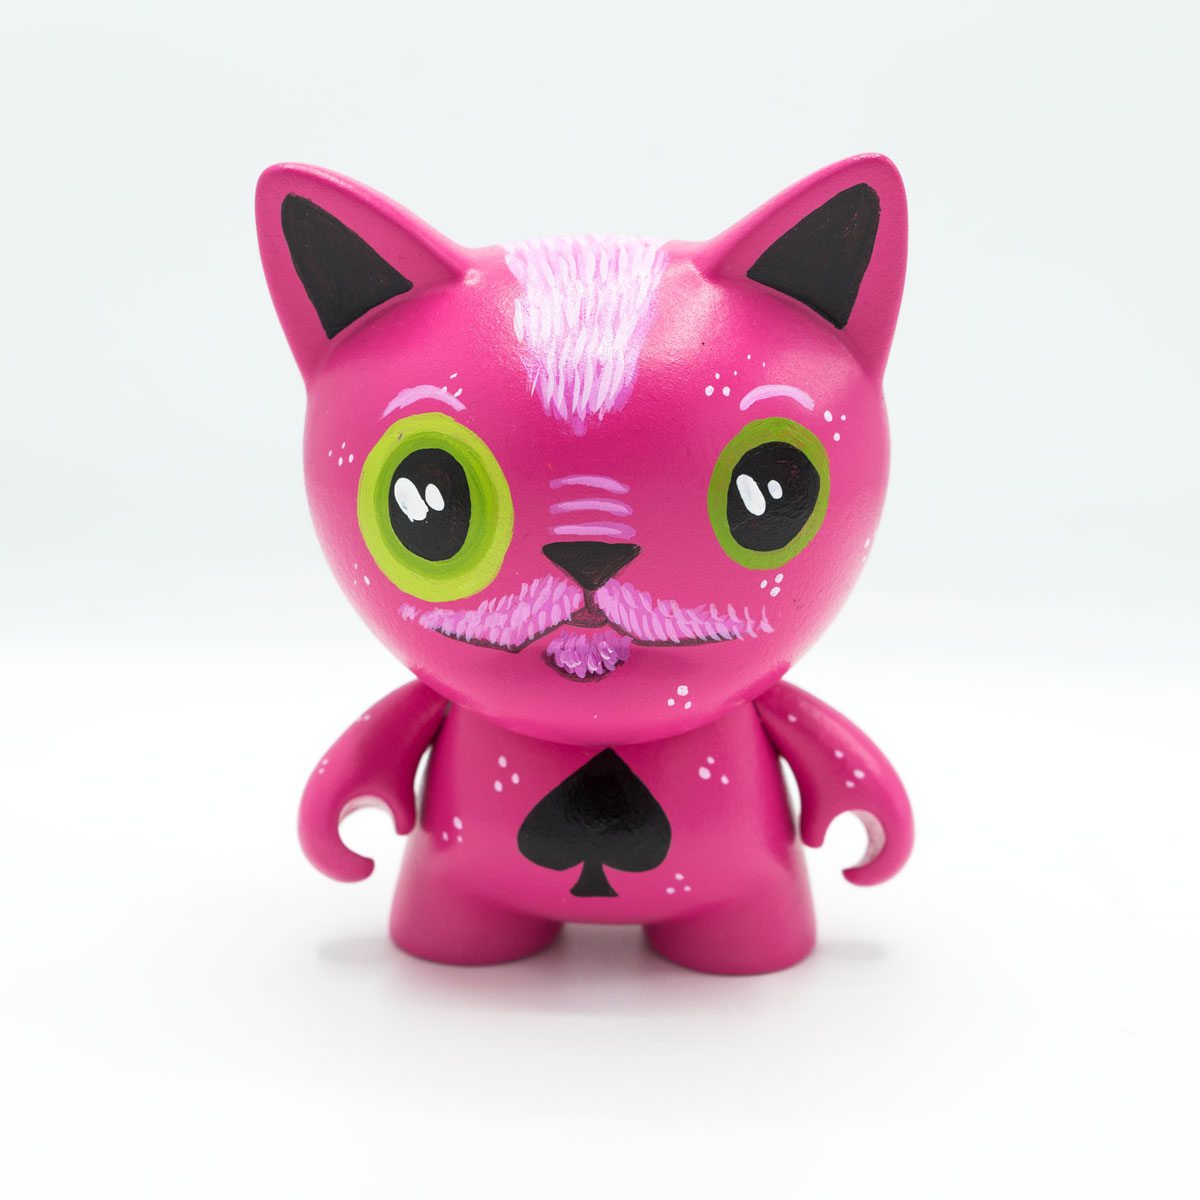 painted pink dunny